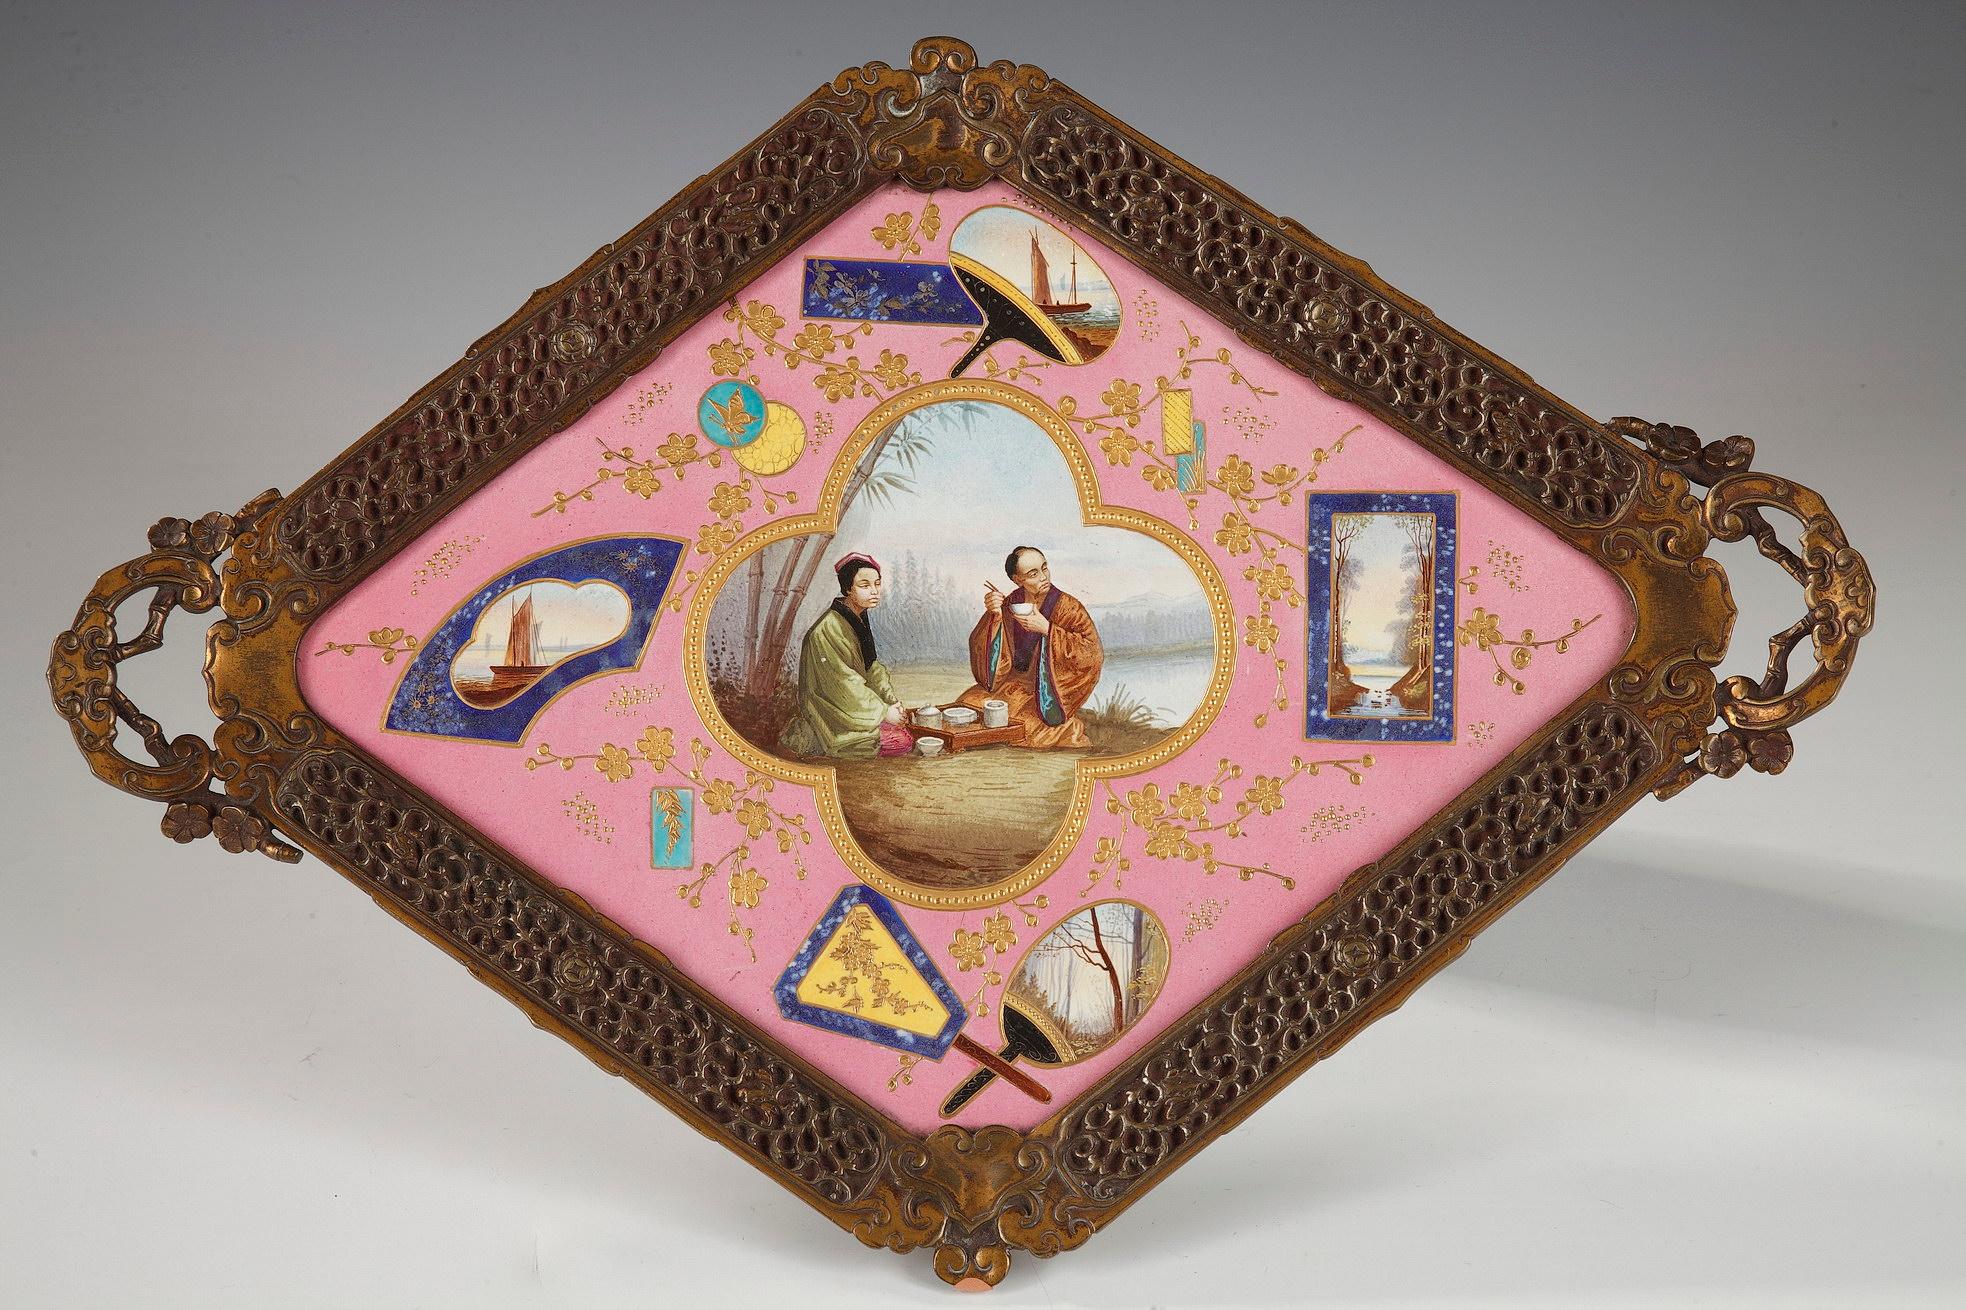 Rare Japanese style diamond-shaped tray attributed to l'Escalier de Cristal, representing lake landscapes in cartouches, and adorned in its center with a lunch scene with a Japanese couple in traditional dress, all highlighted by a gilded decor of